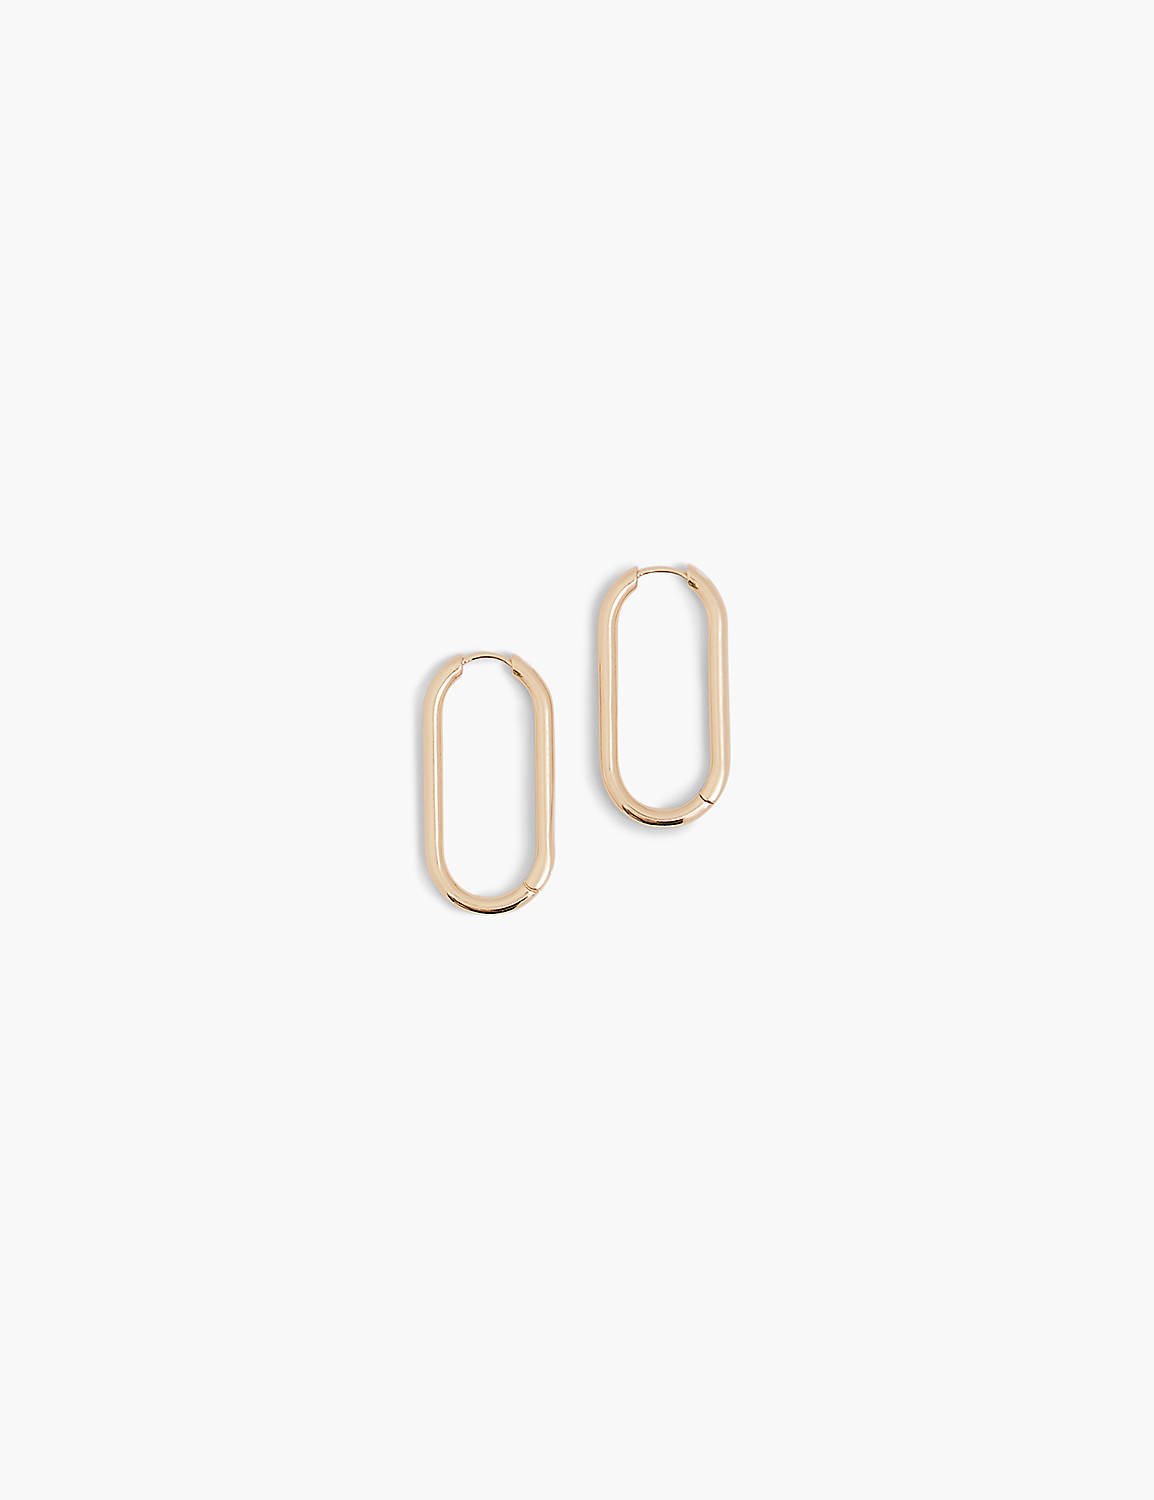 601218505 Elevated Oblong Hoop Earr Product Image 1